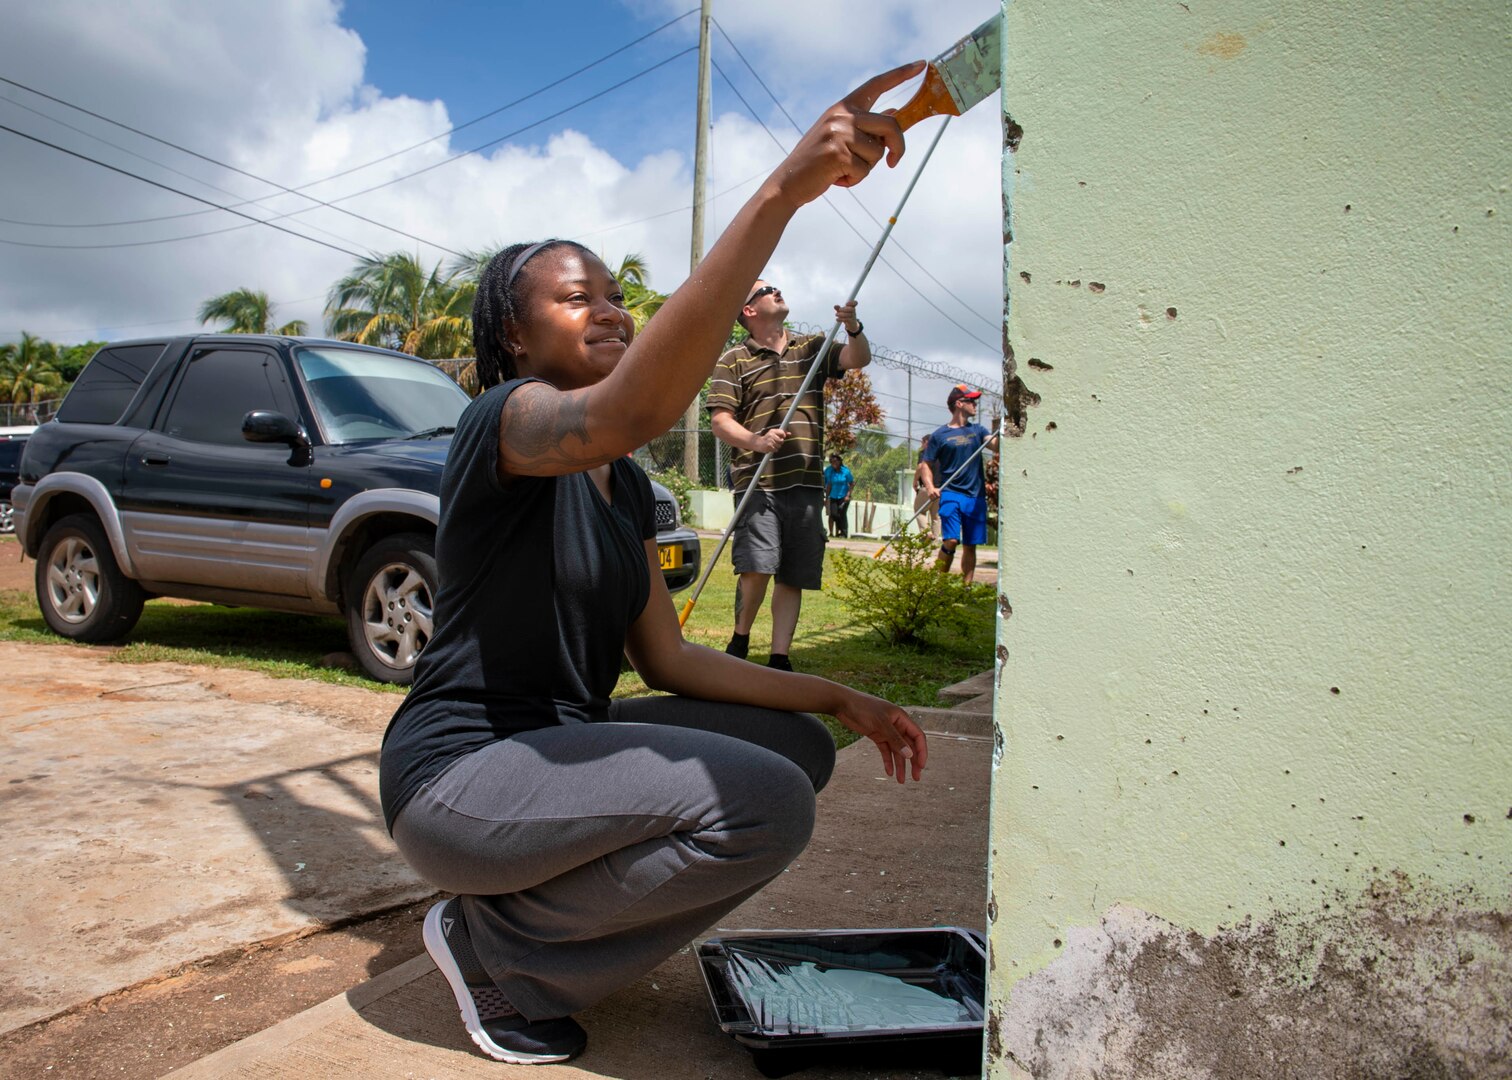 A woman aints a juvenile detention center in St. George's, Grenada.